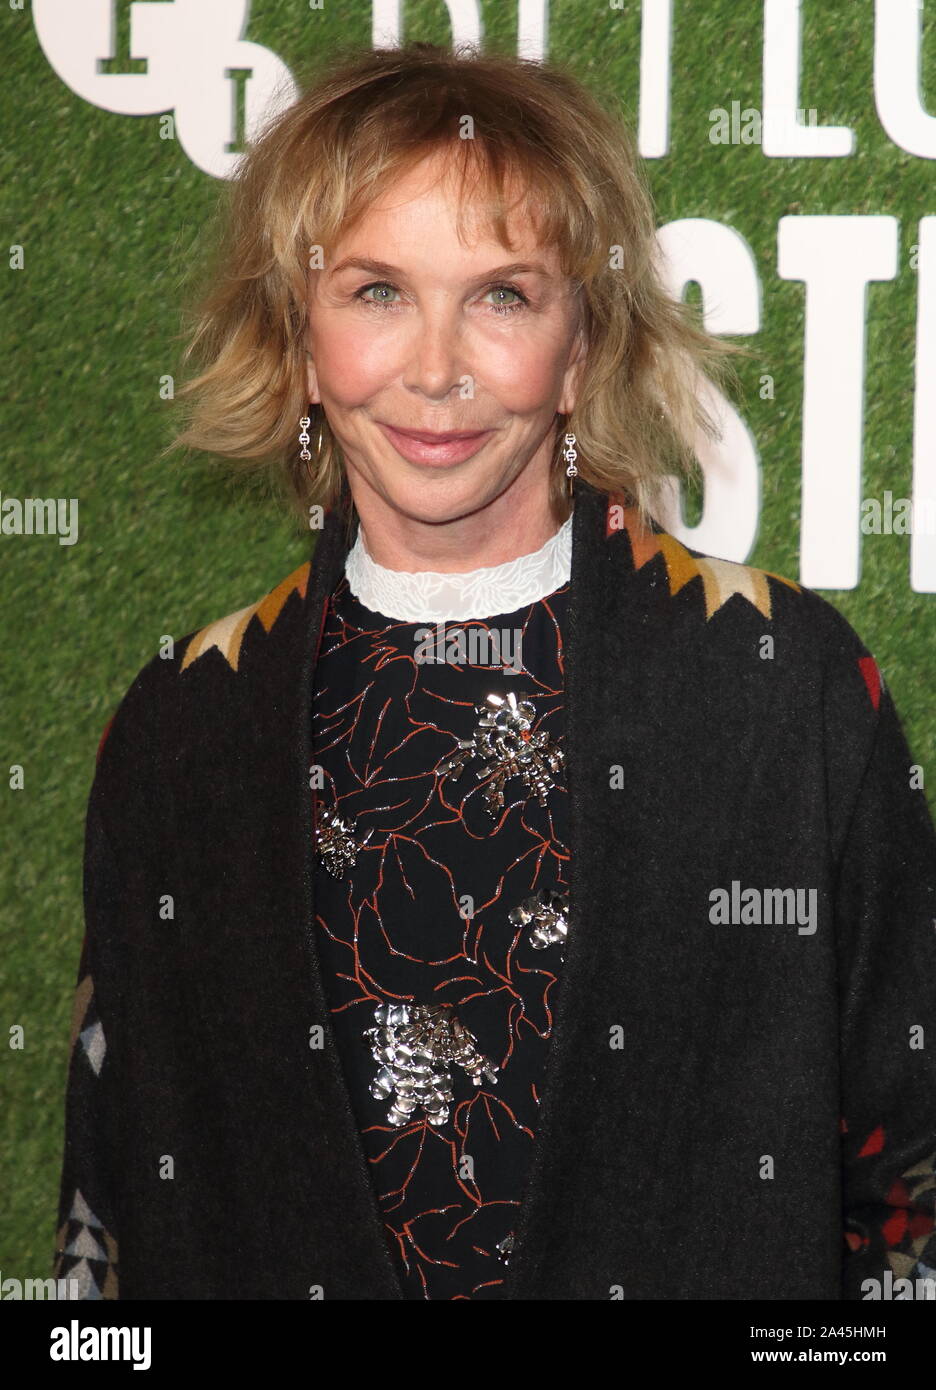 London, UK. 11th Oct, 2019. Trudie Styler attends the 'Western Stars' European Premiere during the 63rd BFI London Film Festival at the Embankment Gardens Cinema in London. Credit: SOPA Images Limited/Alamy Live News Stock Photo